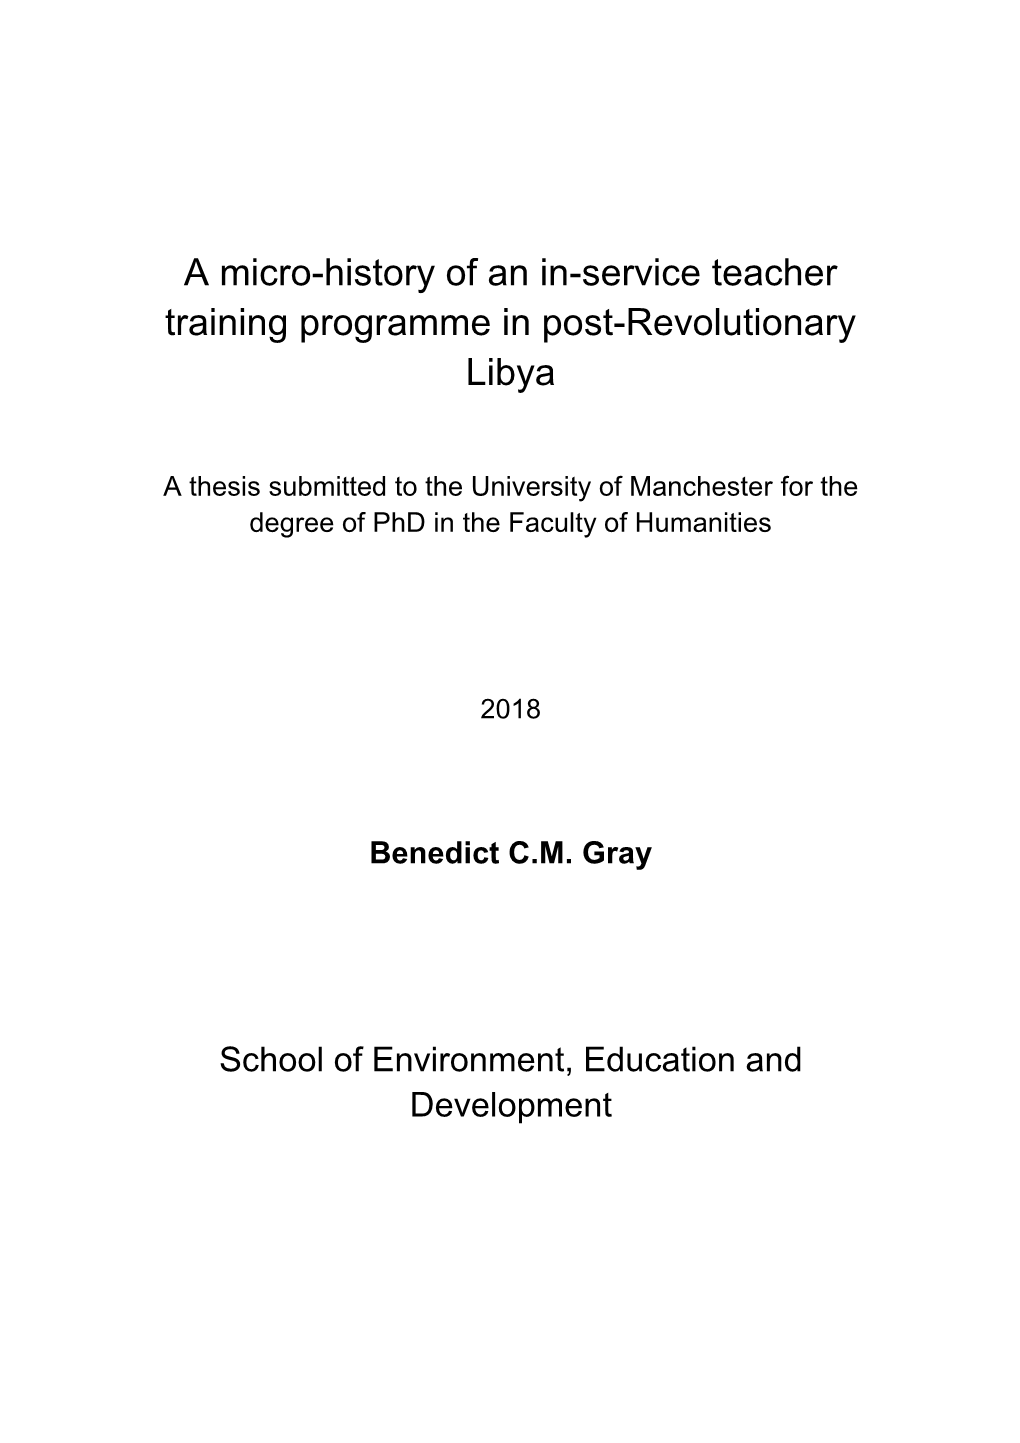 A Micro-History of an In-Service Teacher Training Programme in Post-Revolutionary Libya